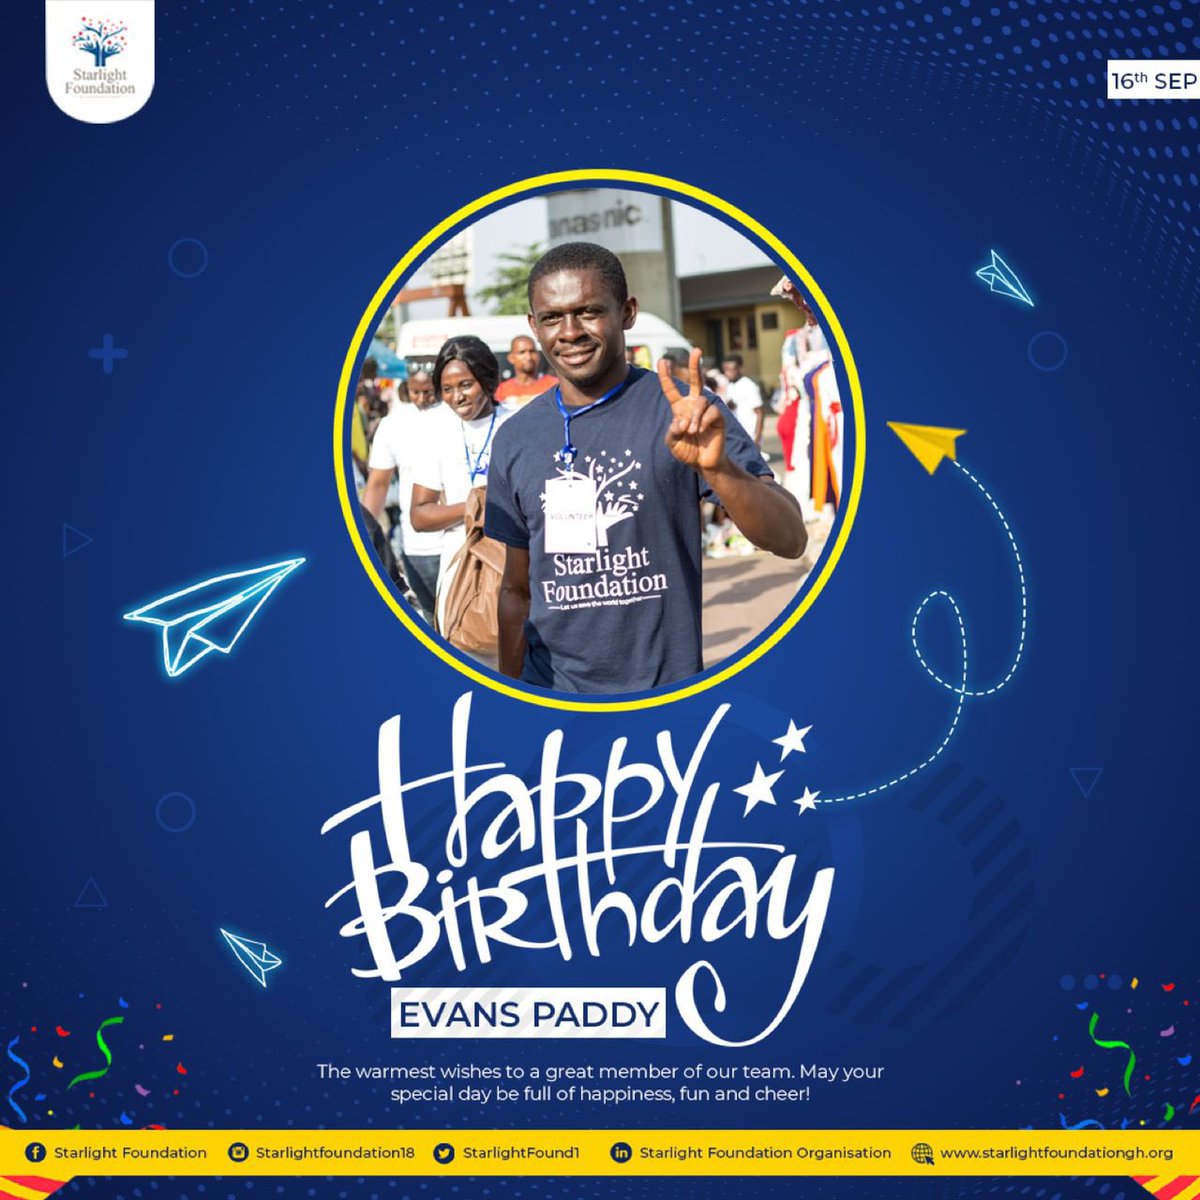 Happy birthday to a great member of our team member🎉🎂🎉. God bless you Evans🙏🏾

#StarlightFoundation #IncreasingImpact #CreatingChange #CelebratingChangemakers #HappyBirthdayEvans
#AGreatChangemaker